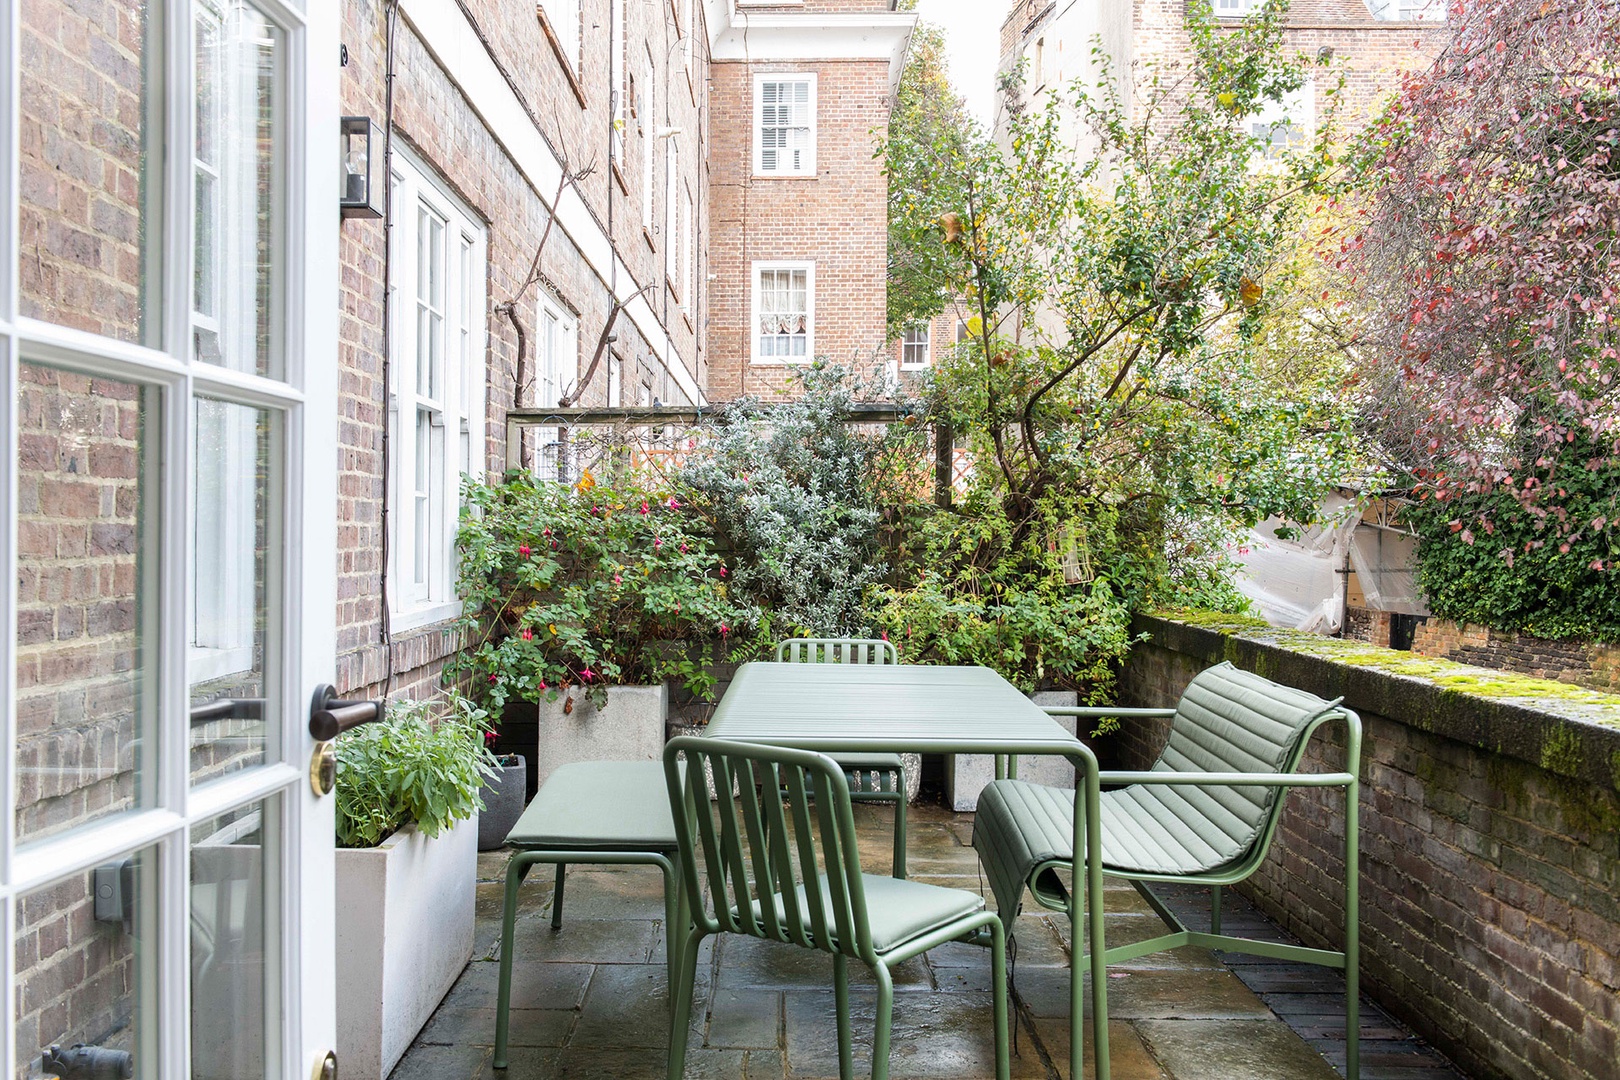 Your own private patio - a rare feature in London!